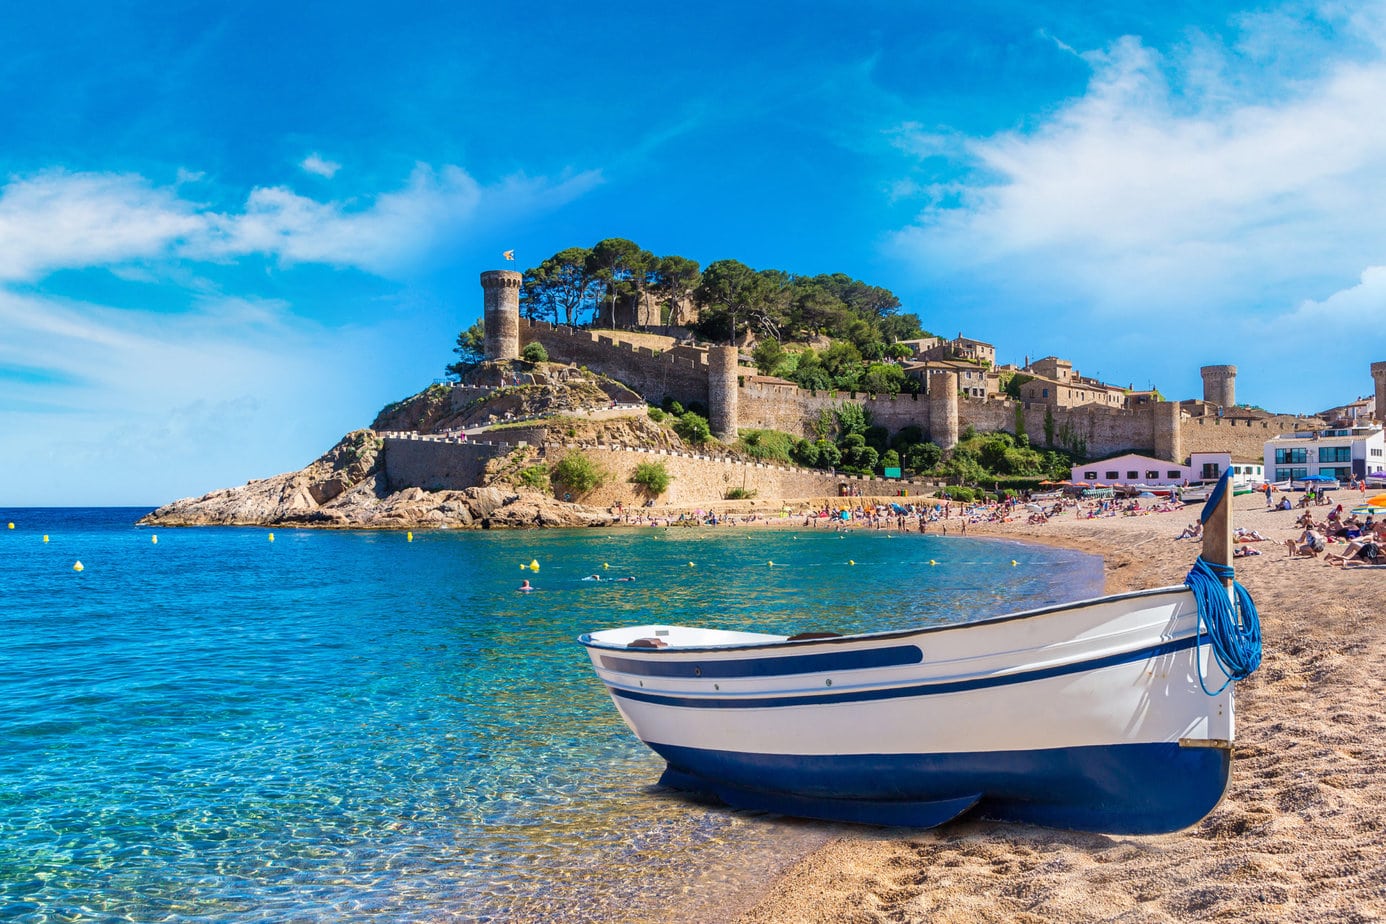 11 of the Best Places to Visit in Costa Brava